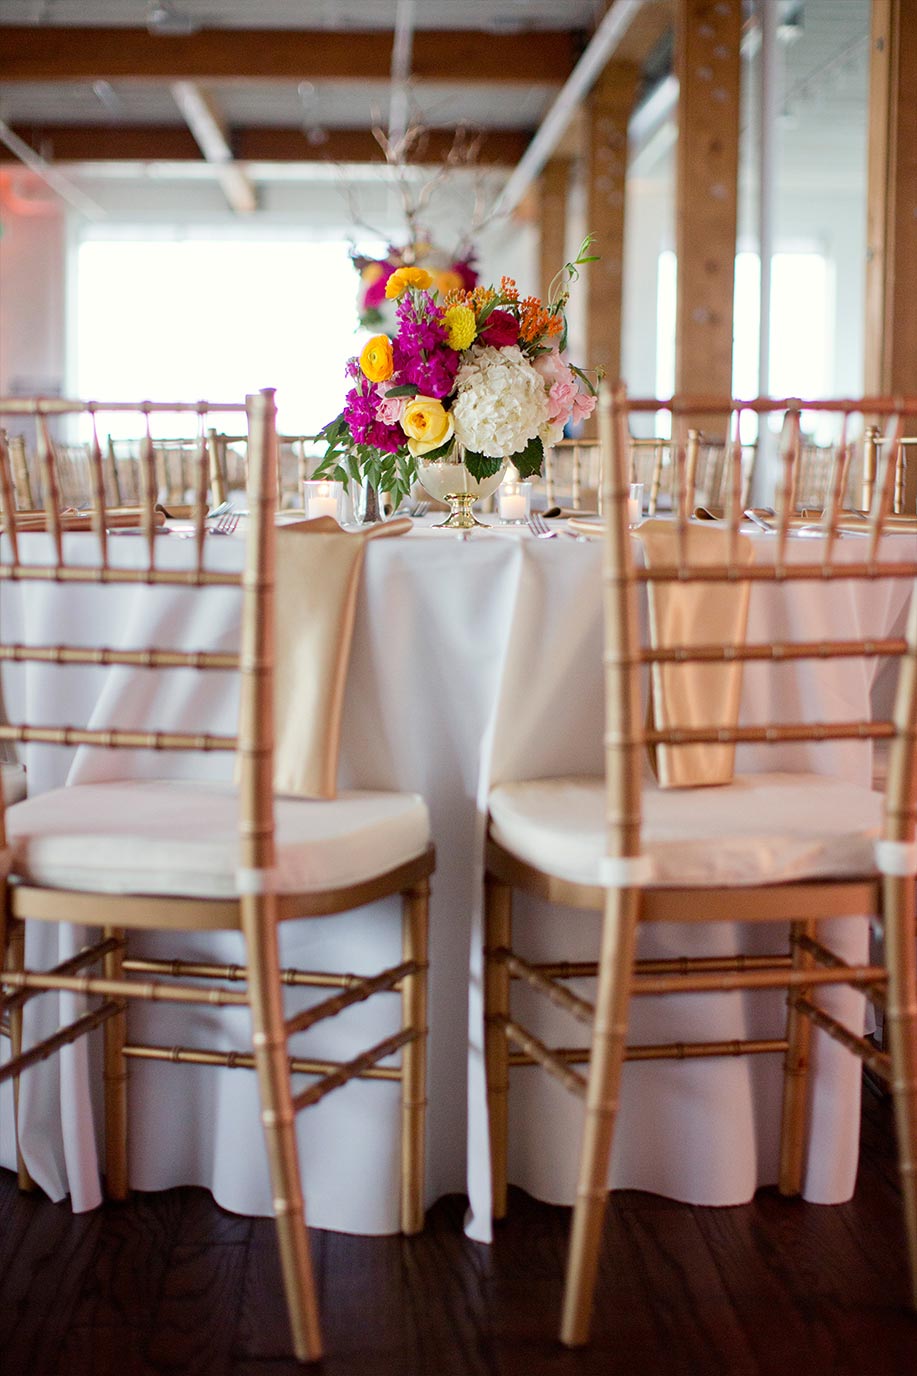 Bride and groom sweetheart table with gold chiavari chairs